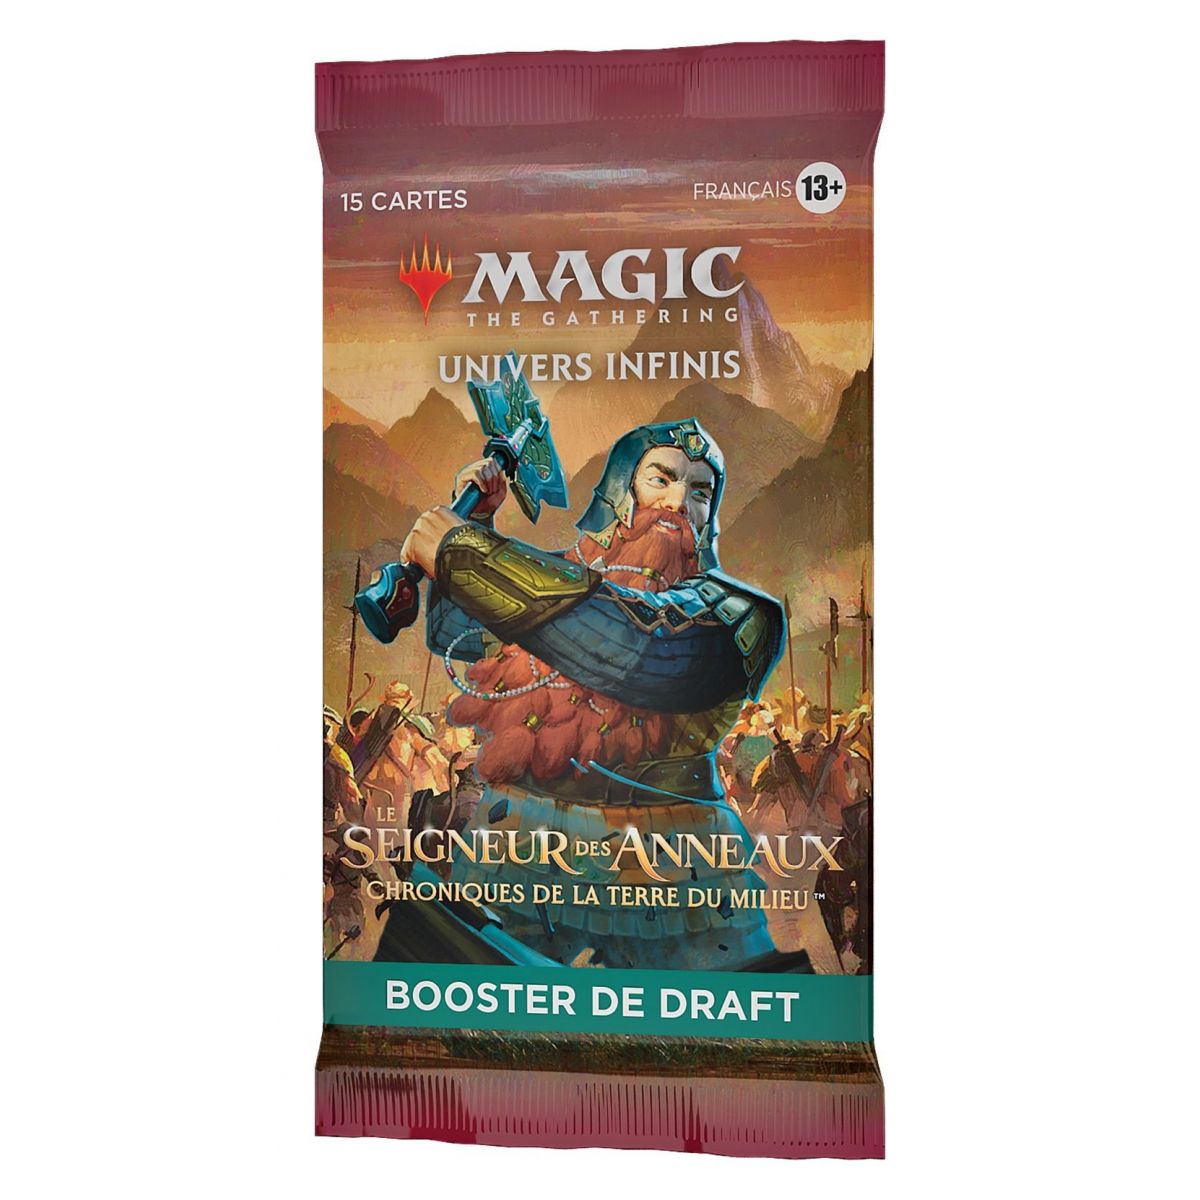 Magic The Gathering - Set of 3 Booster Boxes - Draft - The Lord of the Rings: Chronicles of Middle-earth - FR